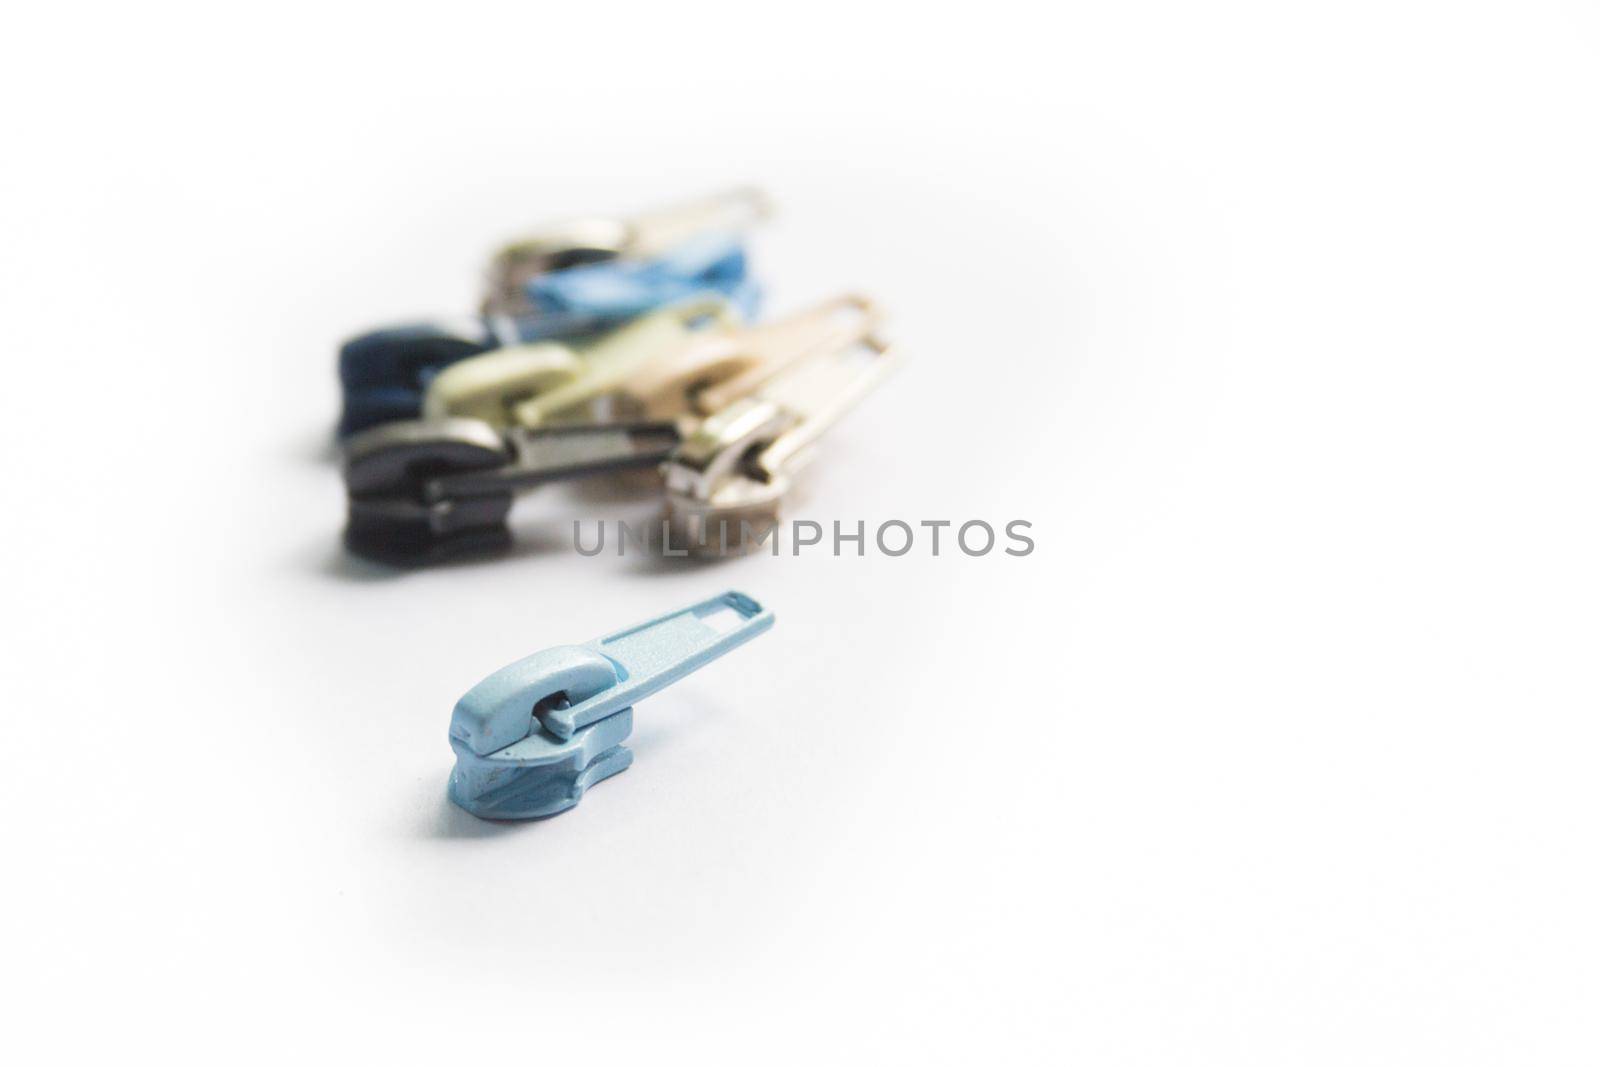 Zipper puller or slider collection isolated on white background